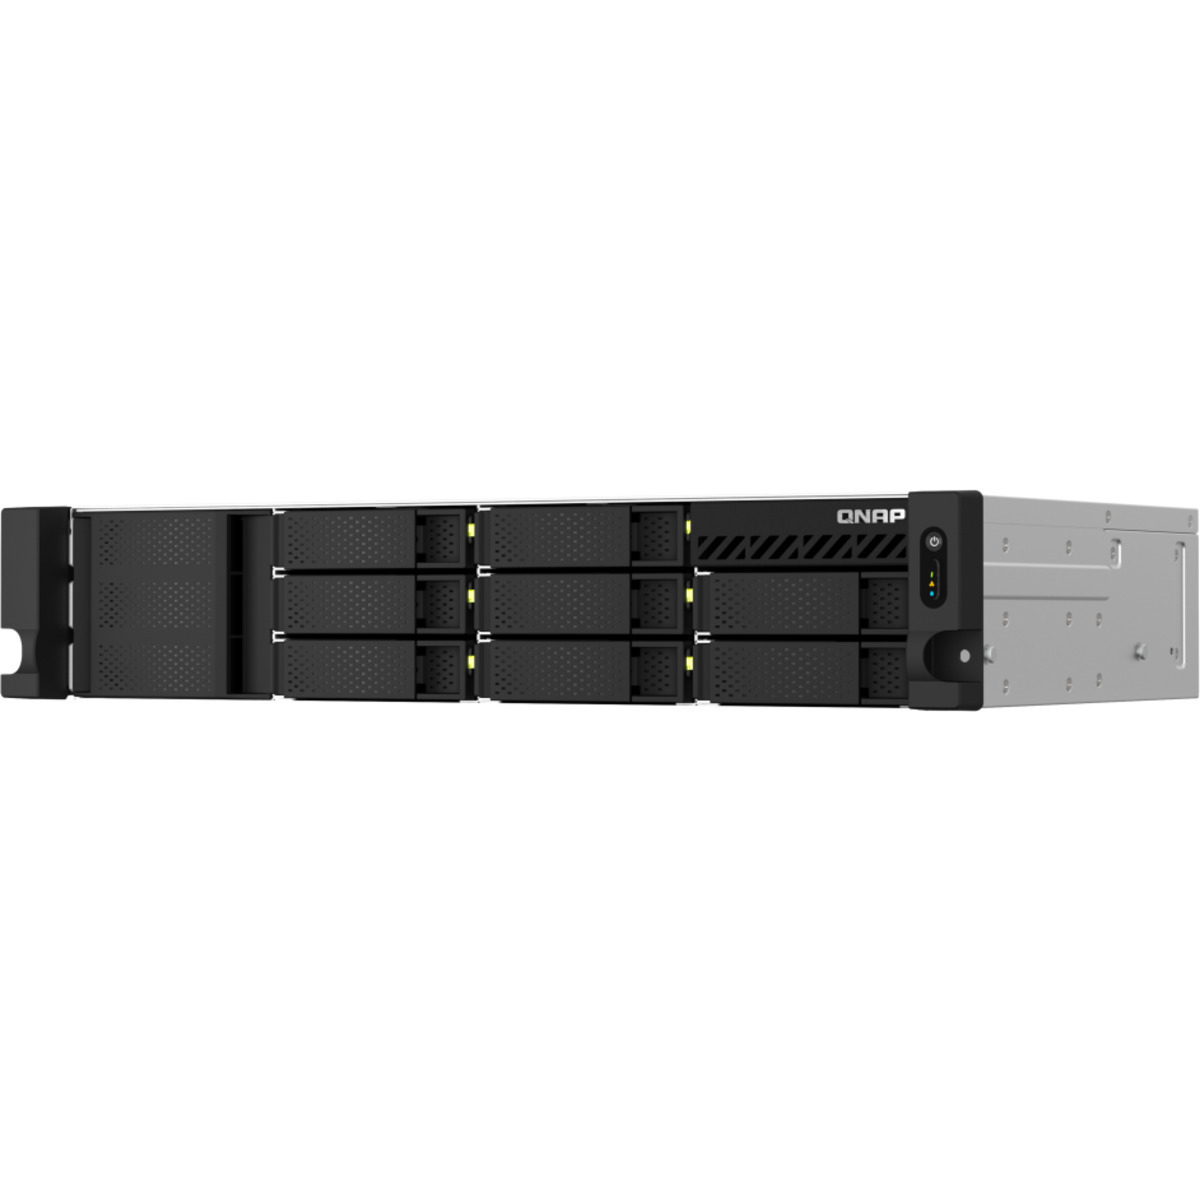 QNAP TS-864eU 24tb 8-Bay RackMount Multimedia / Power User / Business NAS - Network Attached Storage Device 4x6tb Western Digital Red Pro WD6003FFBX 3.5 7200rpm SATA 6Gb/s HDD NAS Class Drives Installed - Burn-In Tested TS-864eU